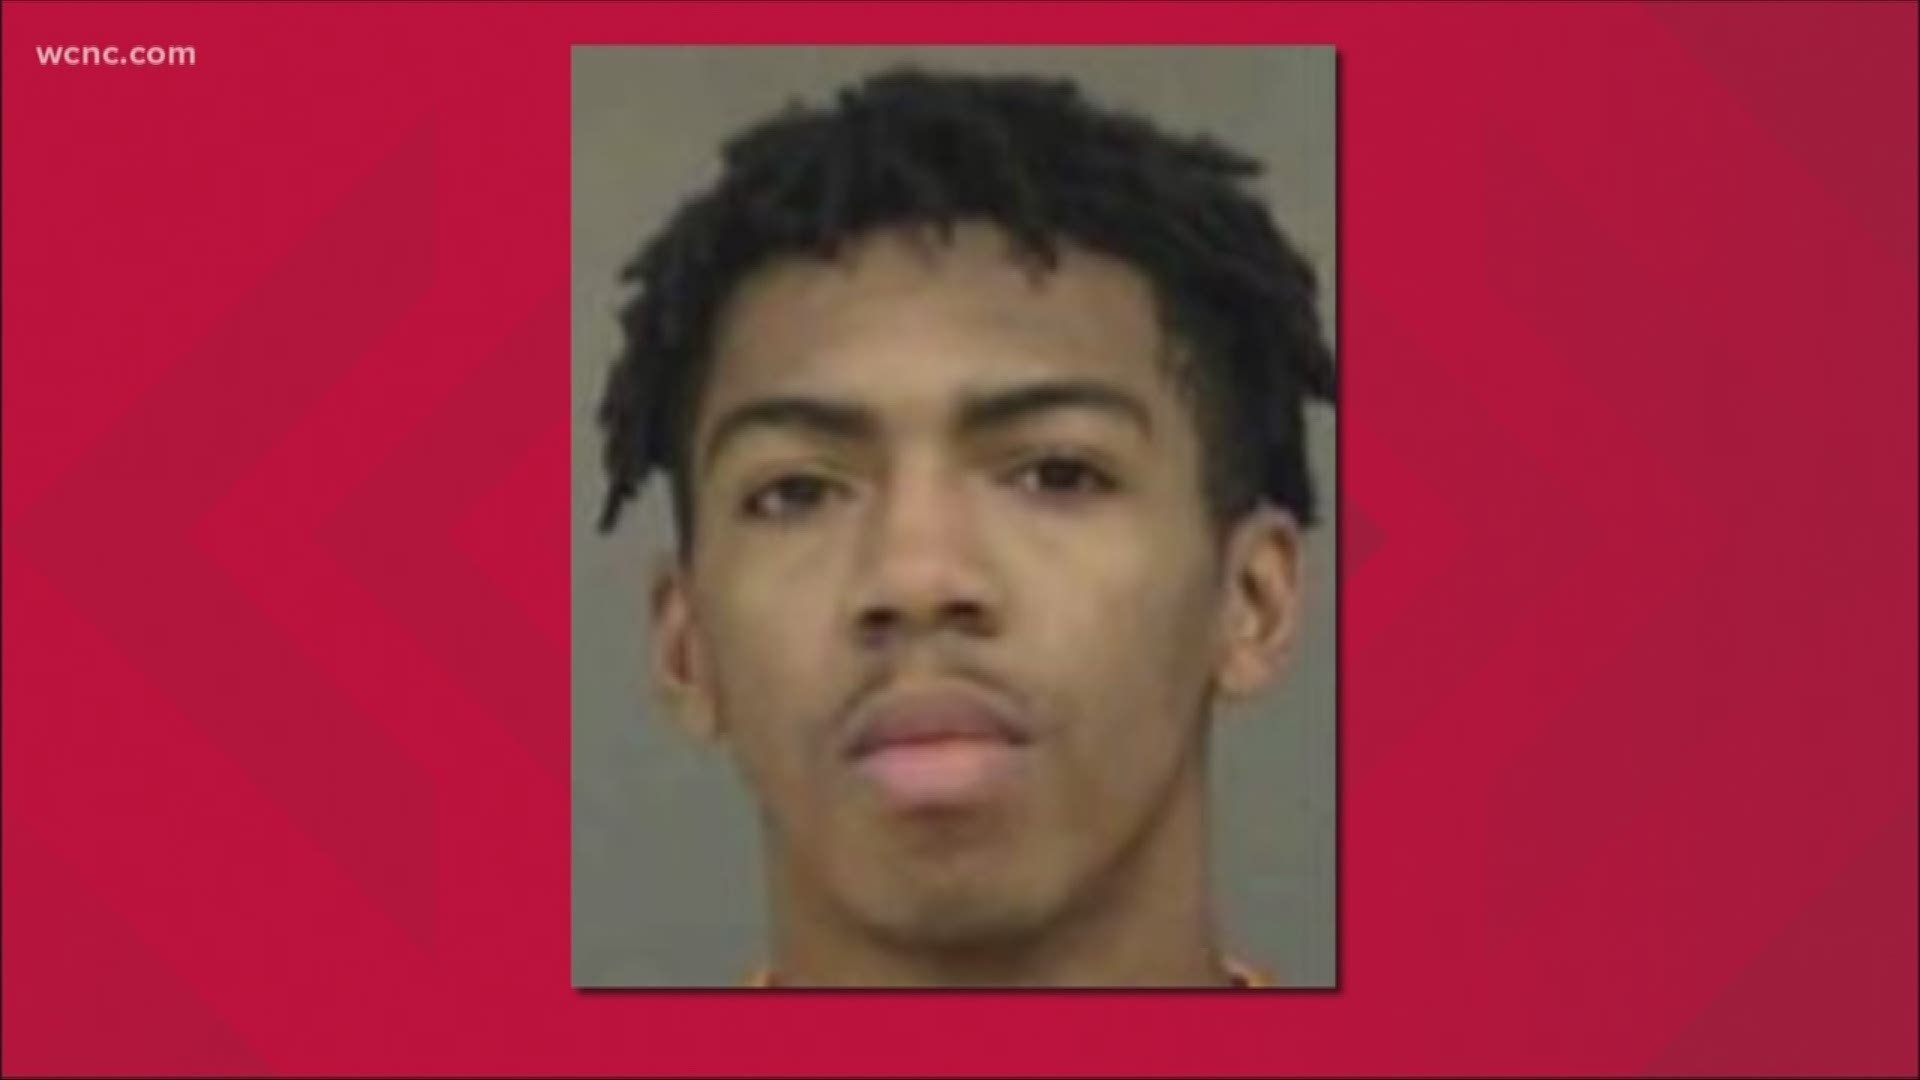 The 18 year old faces a charge of assault with a deadly weapon with intent to kill. The man shot said the build-up to the shot wasn't a fight, and said the suspect was itching to use his gun.